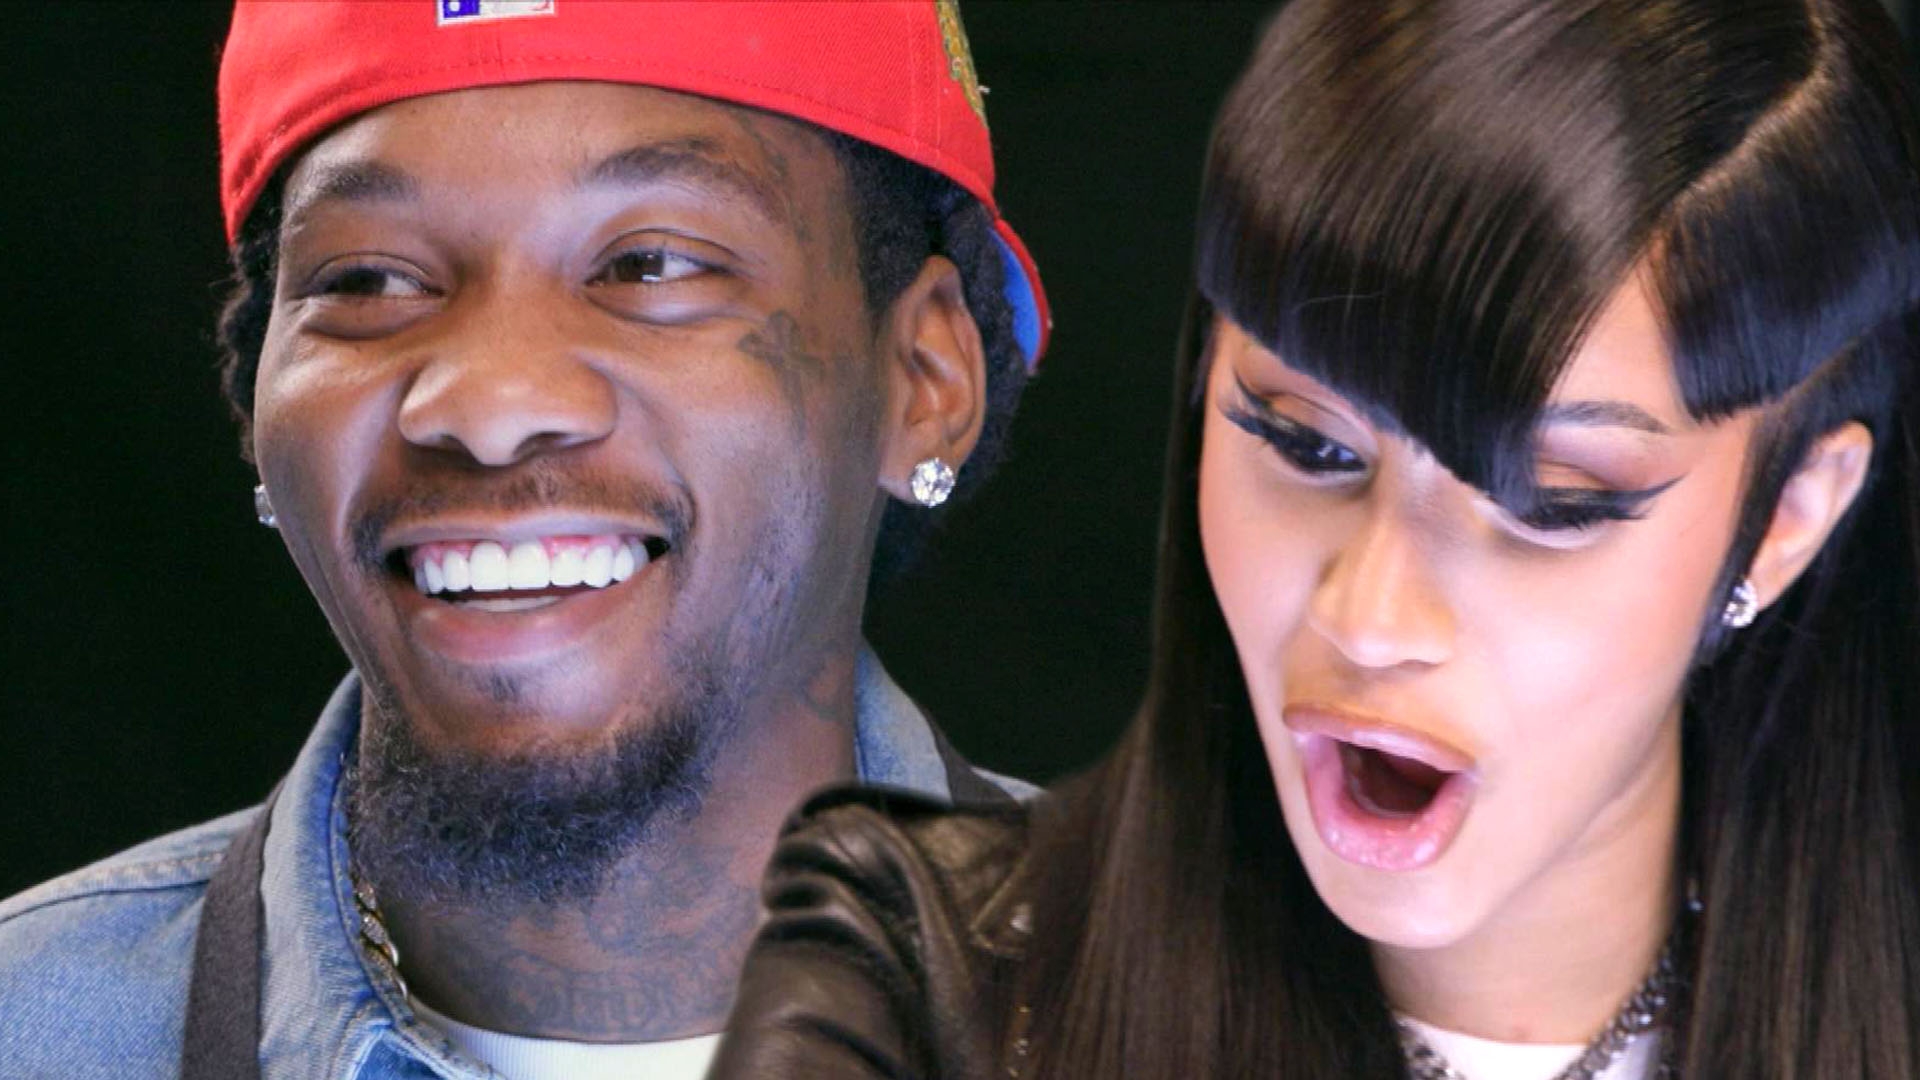 Cardi B and Offset get matching tattoos of their wedding date